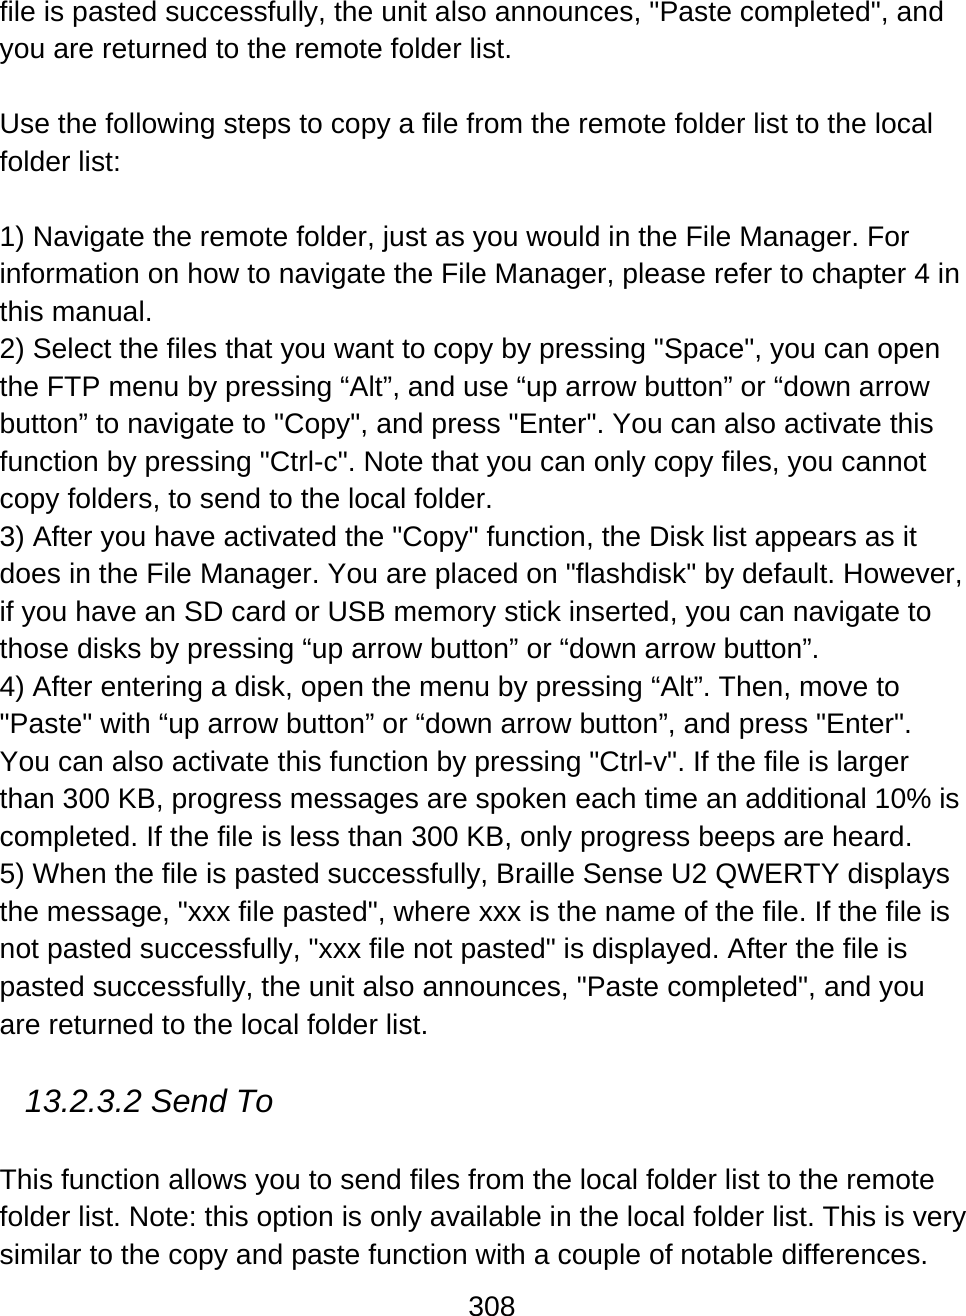 308  file is pasted successfully, the unit also announces, &quot;Paste completed&quot;, and you are returned to the remote folder list.  Use the following steps to copy a file from the remote folder list to the local folder list:  1) Navigate the remote folder, just as you would in the File Manager. For information on how to navigate the File Manager, please refer to chapter 4 in this manual. 2) Select the files that you want to copy by pressing &quot;Space&quot;, you can open the FTP menu by pressing “Alt”, and use “up arrow button” or “down arrow button” to navigate to &quot;Copy&quot;, and press &quot;Enter&quot;. You can also activate this function by pressing &quot;Ctrl-c&quot;. Note that you can only copy files, you cannot copy folders, to send to the local folder. 3) After you have activated the &quot;Copy&quot; function, the Disk list appears as it does in the File Manager. You are placed on &quot;flashdisk&quot; by default. However, if you have an SD card or USB memory stick inserted, you can navigate to those disks by pressing “up arrow button” or “down arrow button”.  4) After entering a disk, open the menu by pressing “Alt”. Then, move to &quot;Paste&quot; with “up arrow button” or “down arrow button”, and press &quot;Enter&quot;. You can also activate this function by pressing &quot;Ctrl-v&quot;. If the file is larger than 300 KB, progress messages are spoken each time an additional 10% is completed. If the file is less than 300 KB, only progress beeps are heard.  5) When the file is pasted successfully, Braille Sense U2 QWERTY displays the message, &quot;xxx file pasted&quot;, where xxx is the name of the file. If the file is not pasted successfully, &quot;xxx file not pasted&quot; is displayed. After the file is pasted successfully, the unit also announces, &quot;Paste completed&quot;, and you are returned to the local folder list.  13.2.3.2 Send To  This function allows you to send files from the local folder list to the remote folder list. Note: this option is only available in the local folder list. This is very similar to the copy and paste function with a couple of notable differences. 